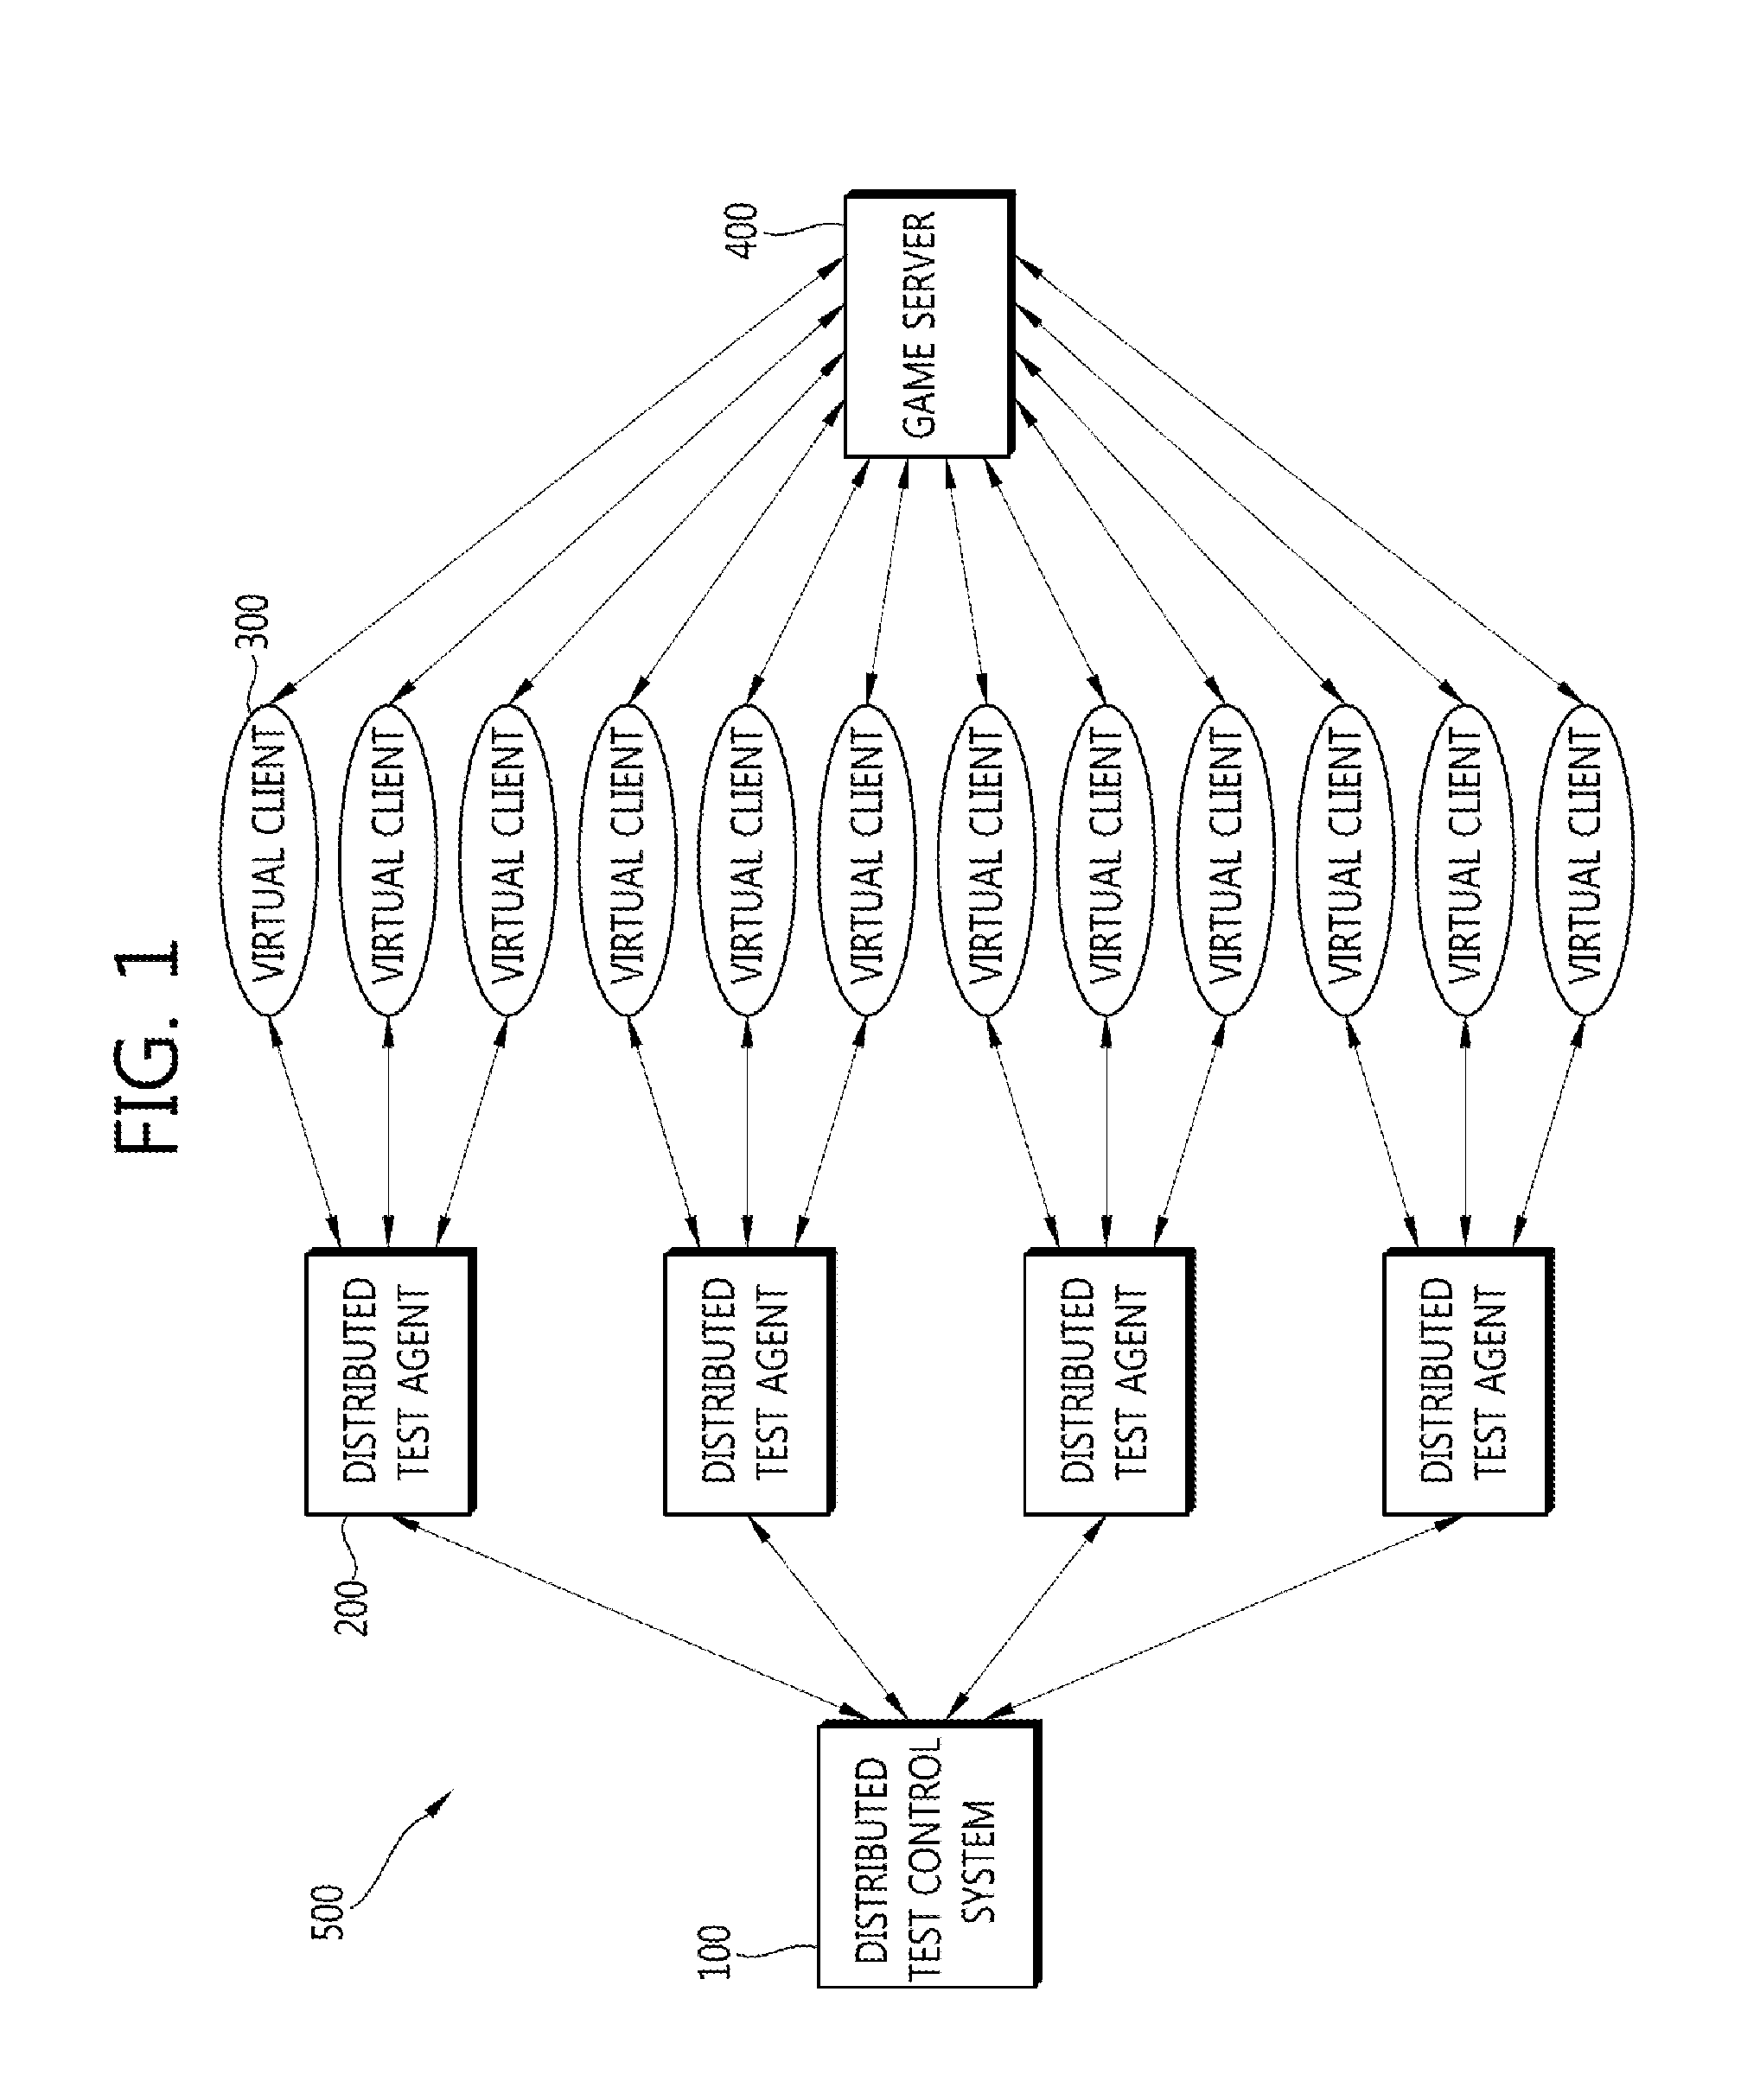 Distributed test system and method, distributed test control system and method, distributed test plan creating apparatus and method, distributed test agent, and distributed test plan performing method